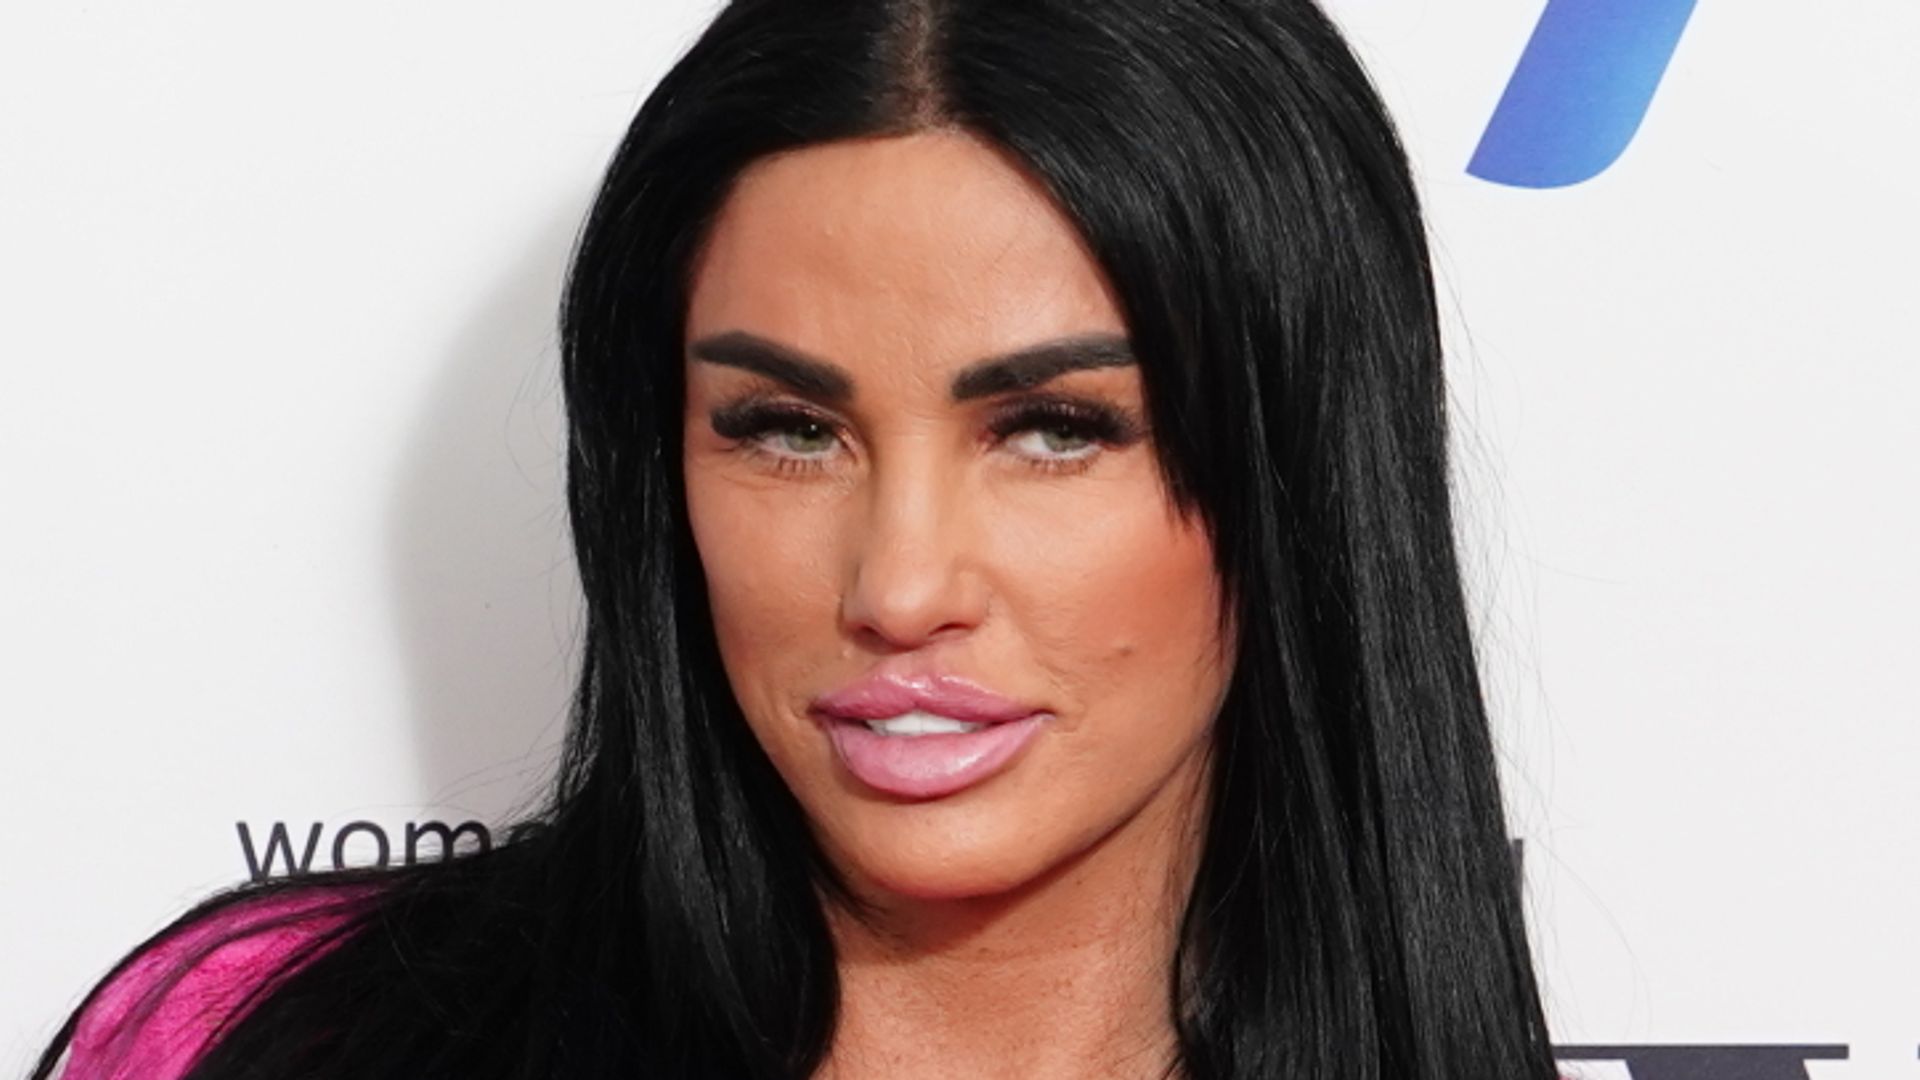 Katie Price could be jailed if she keeps missing bankruptcy hearings